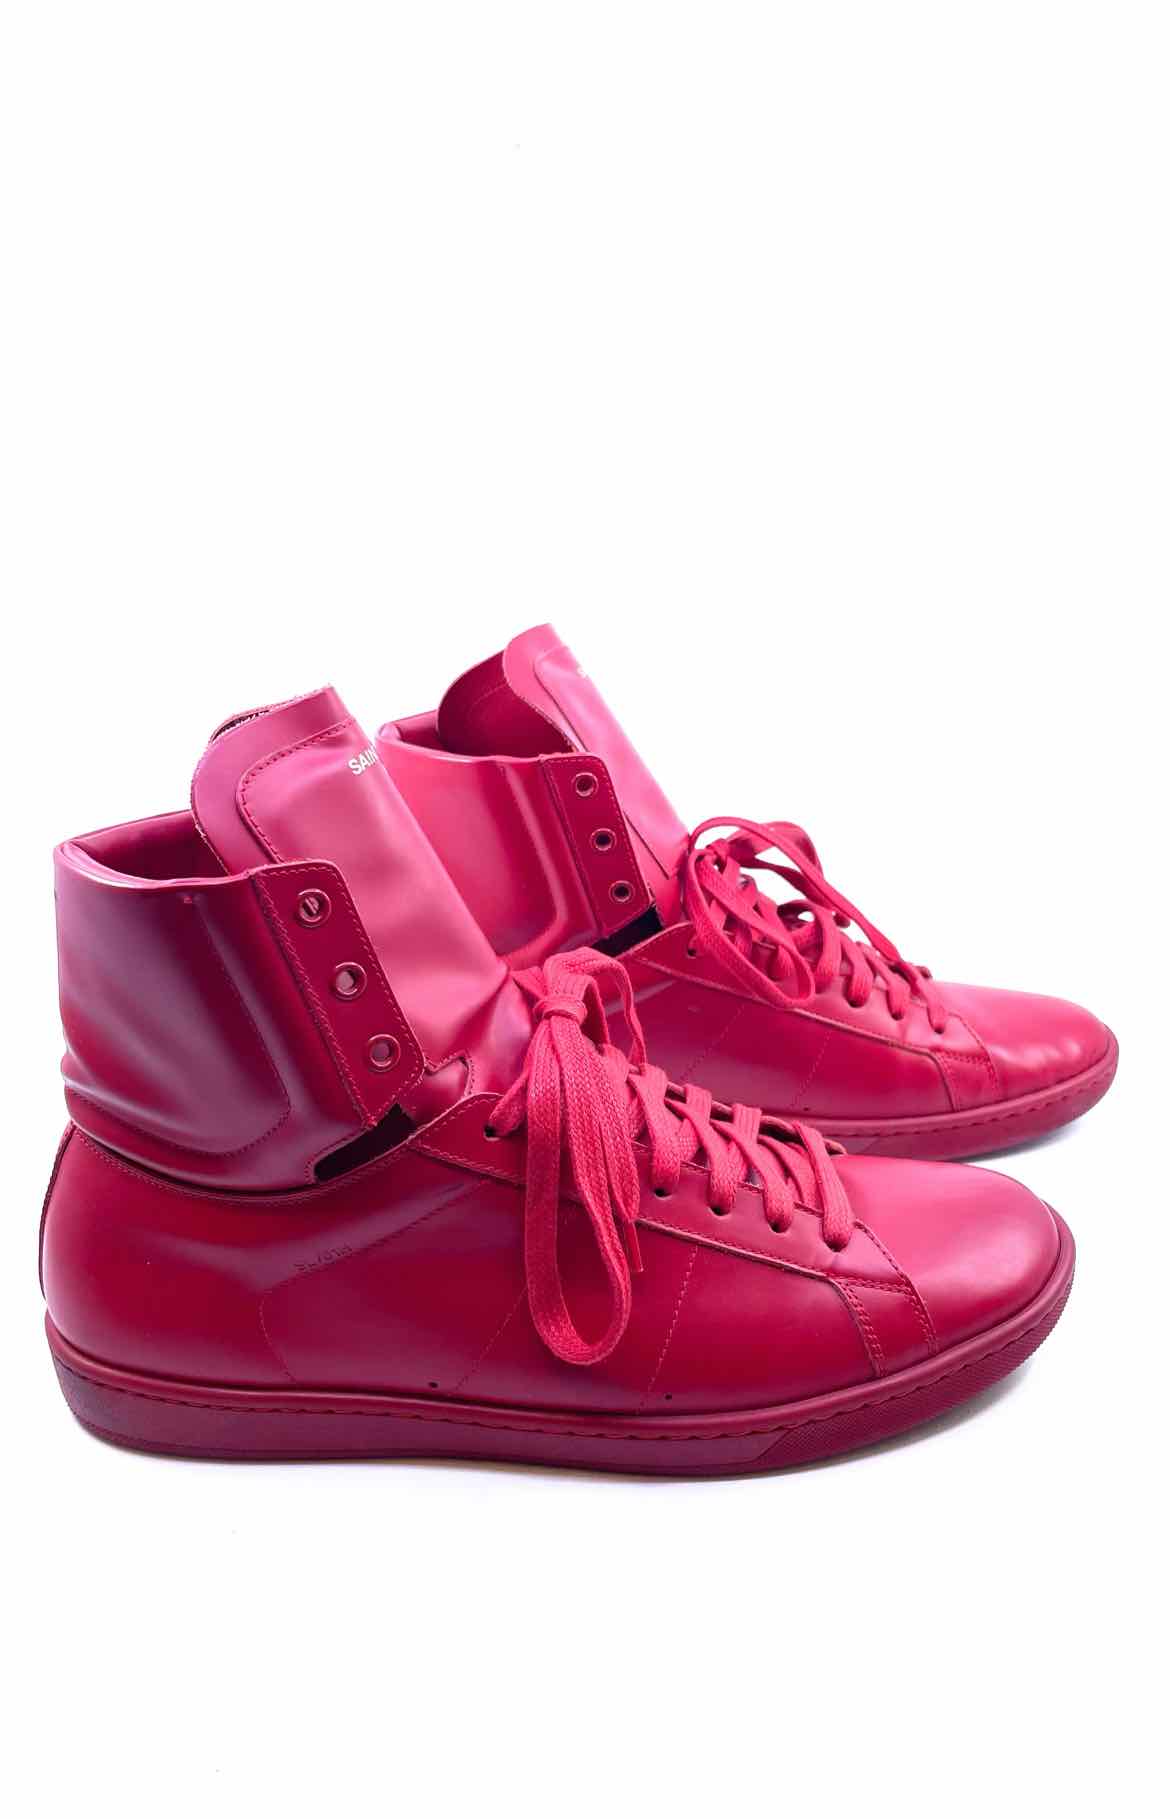 Buy Hush Berry Funky S.S. Men's Red Leather Ankle Sneakers Boots - UK/IND 9  at Amazon.in